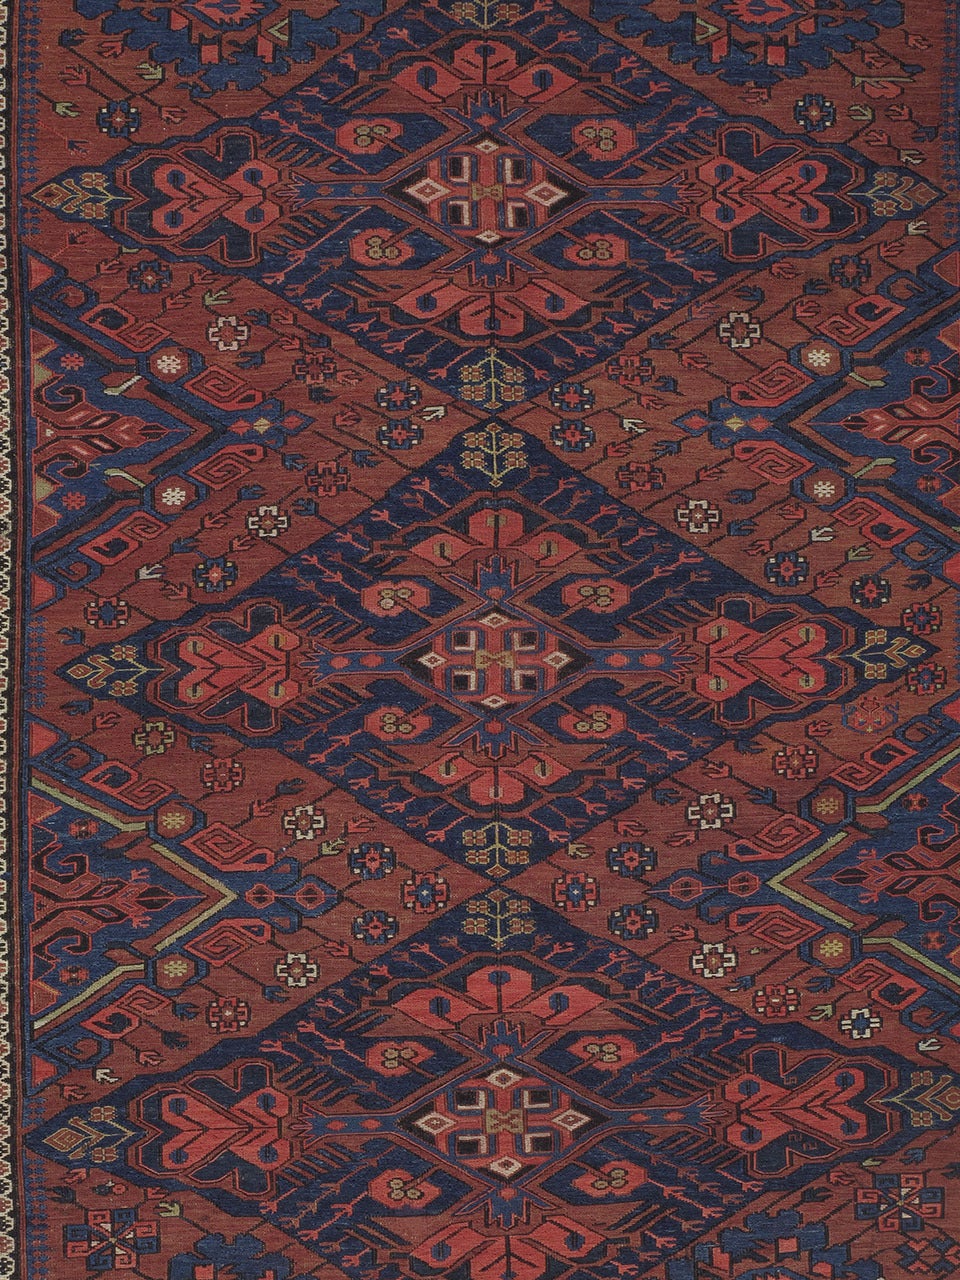 A very handsome antique tribal flat-weave from Northeastern Caucasus in Azerbaijan, woven in the intricate 